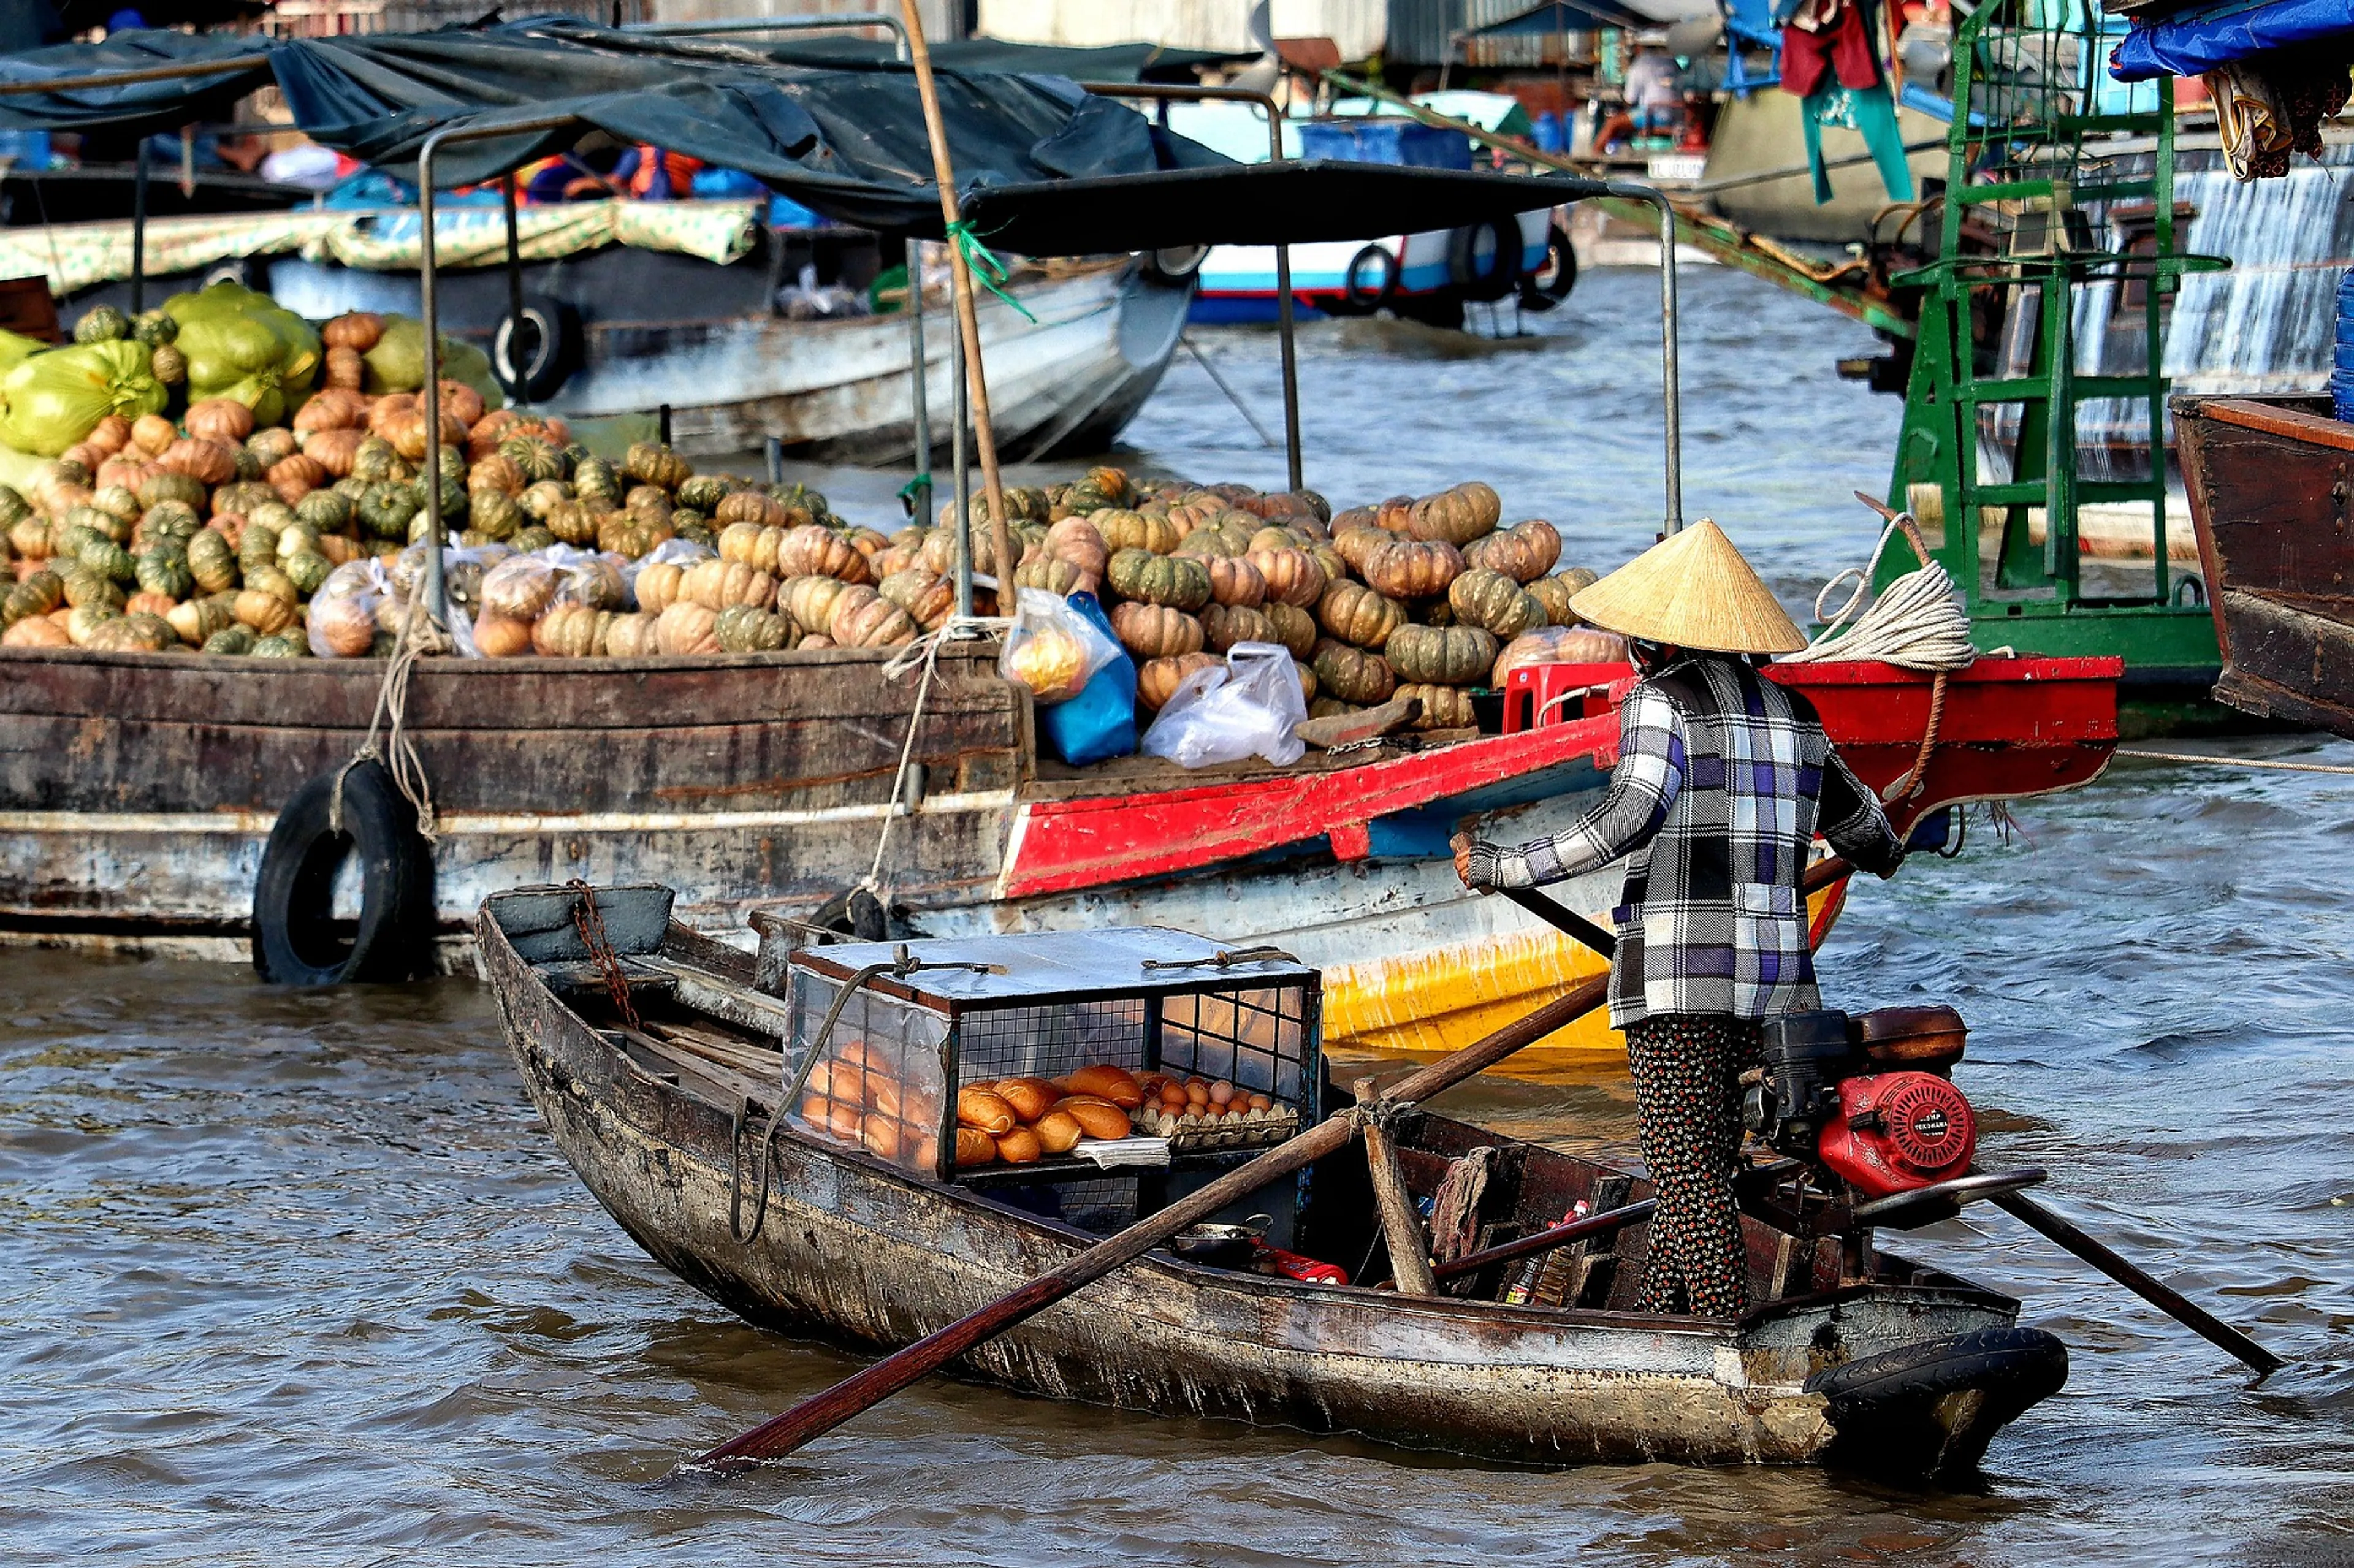 A Quick Guide to Cai Rang Floating Market 